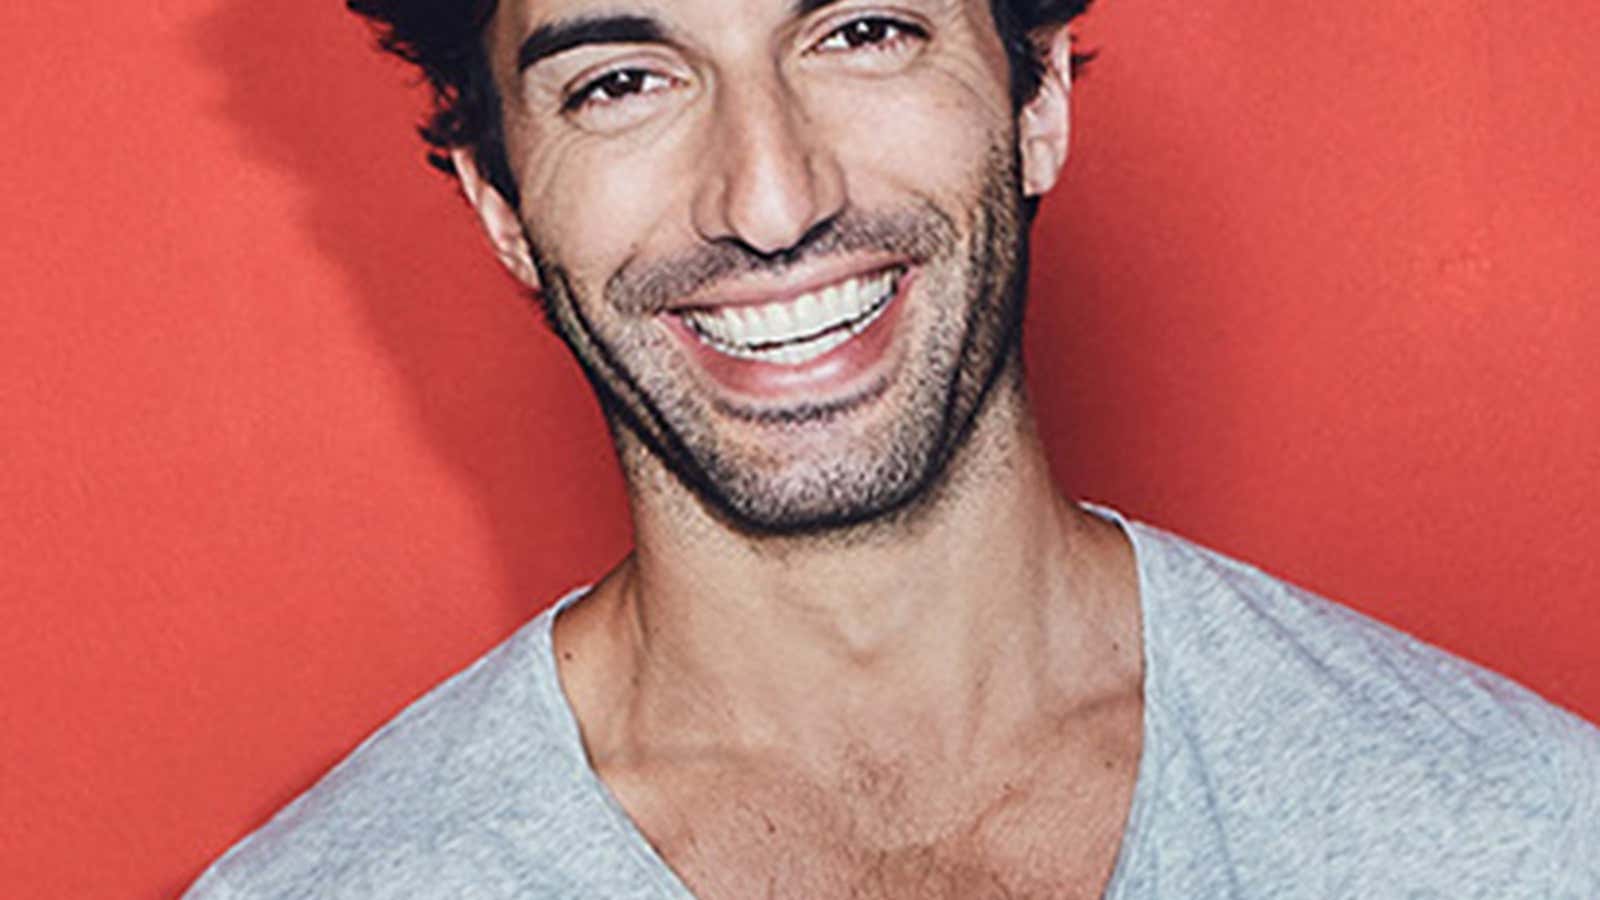 Actor Justin Baldoni has crucial advice for men who’ve offended women, but still want to be feminists